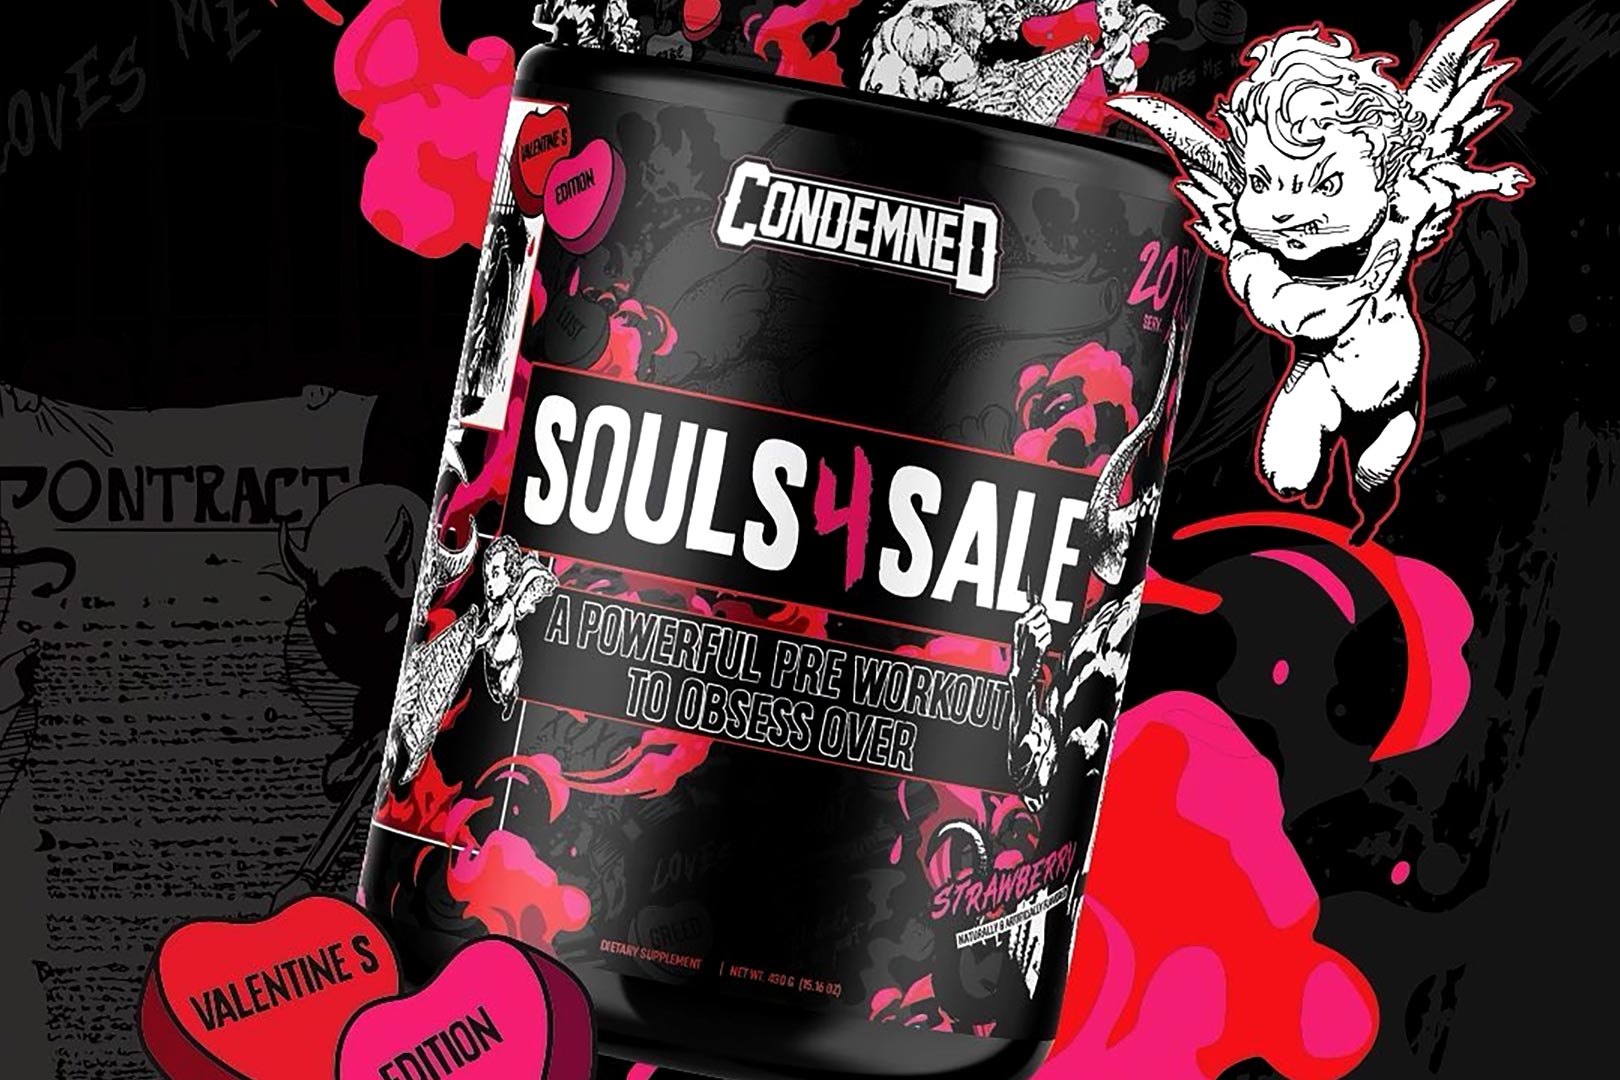 Condemned Souls4sale Valentines